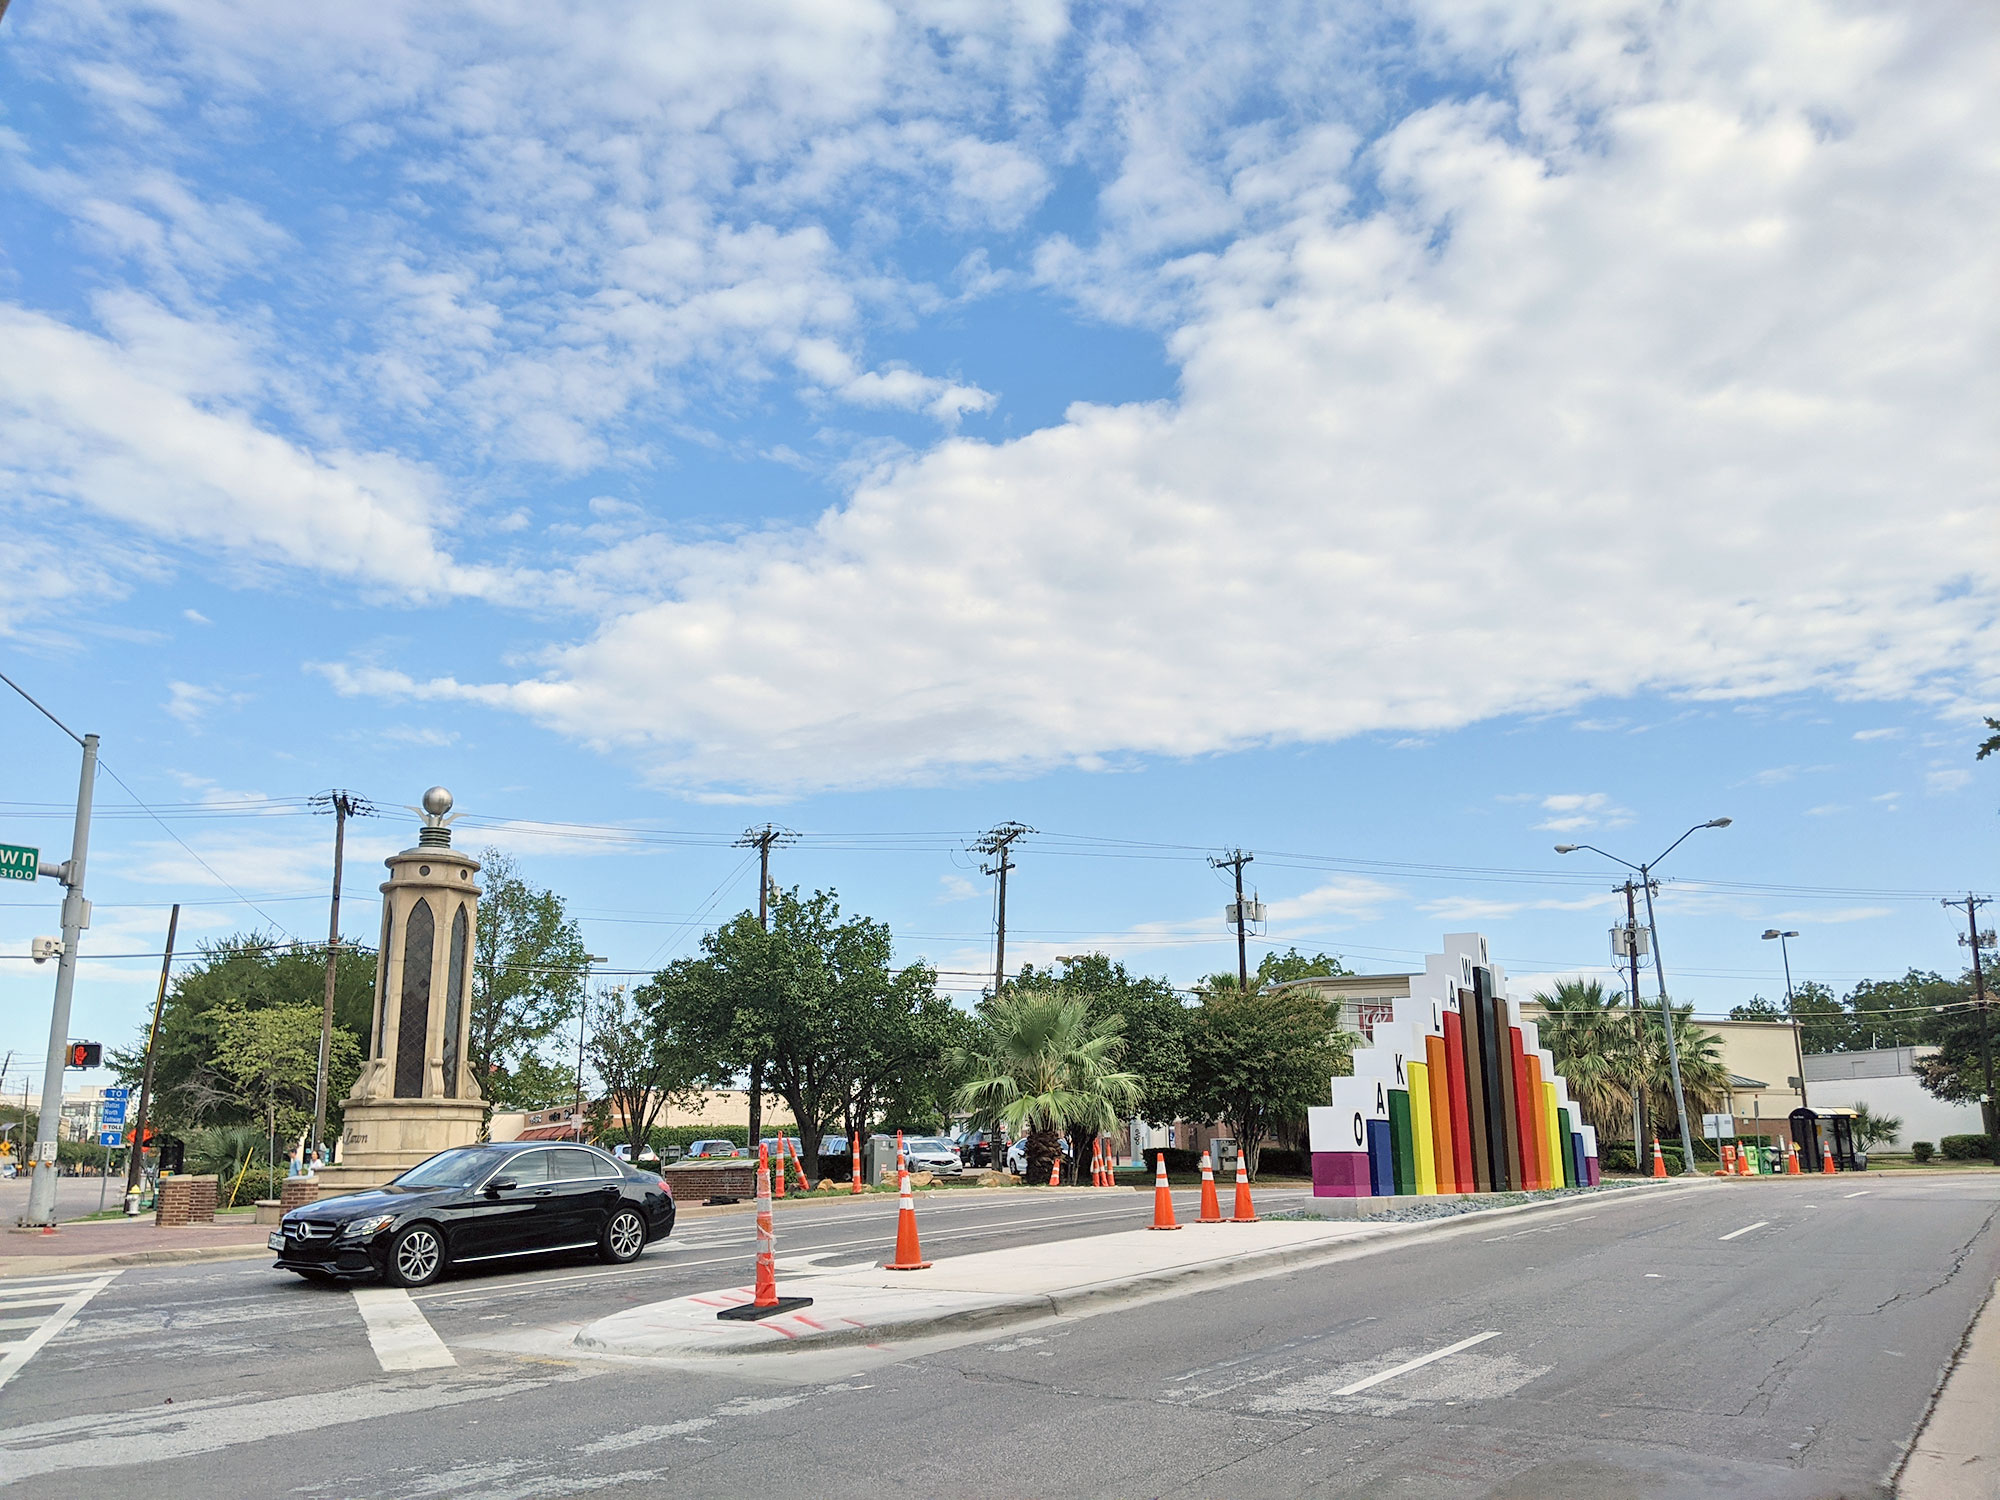 The rainbow entry sign in the Dallas gayborhood, in front of the Centrum building.